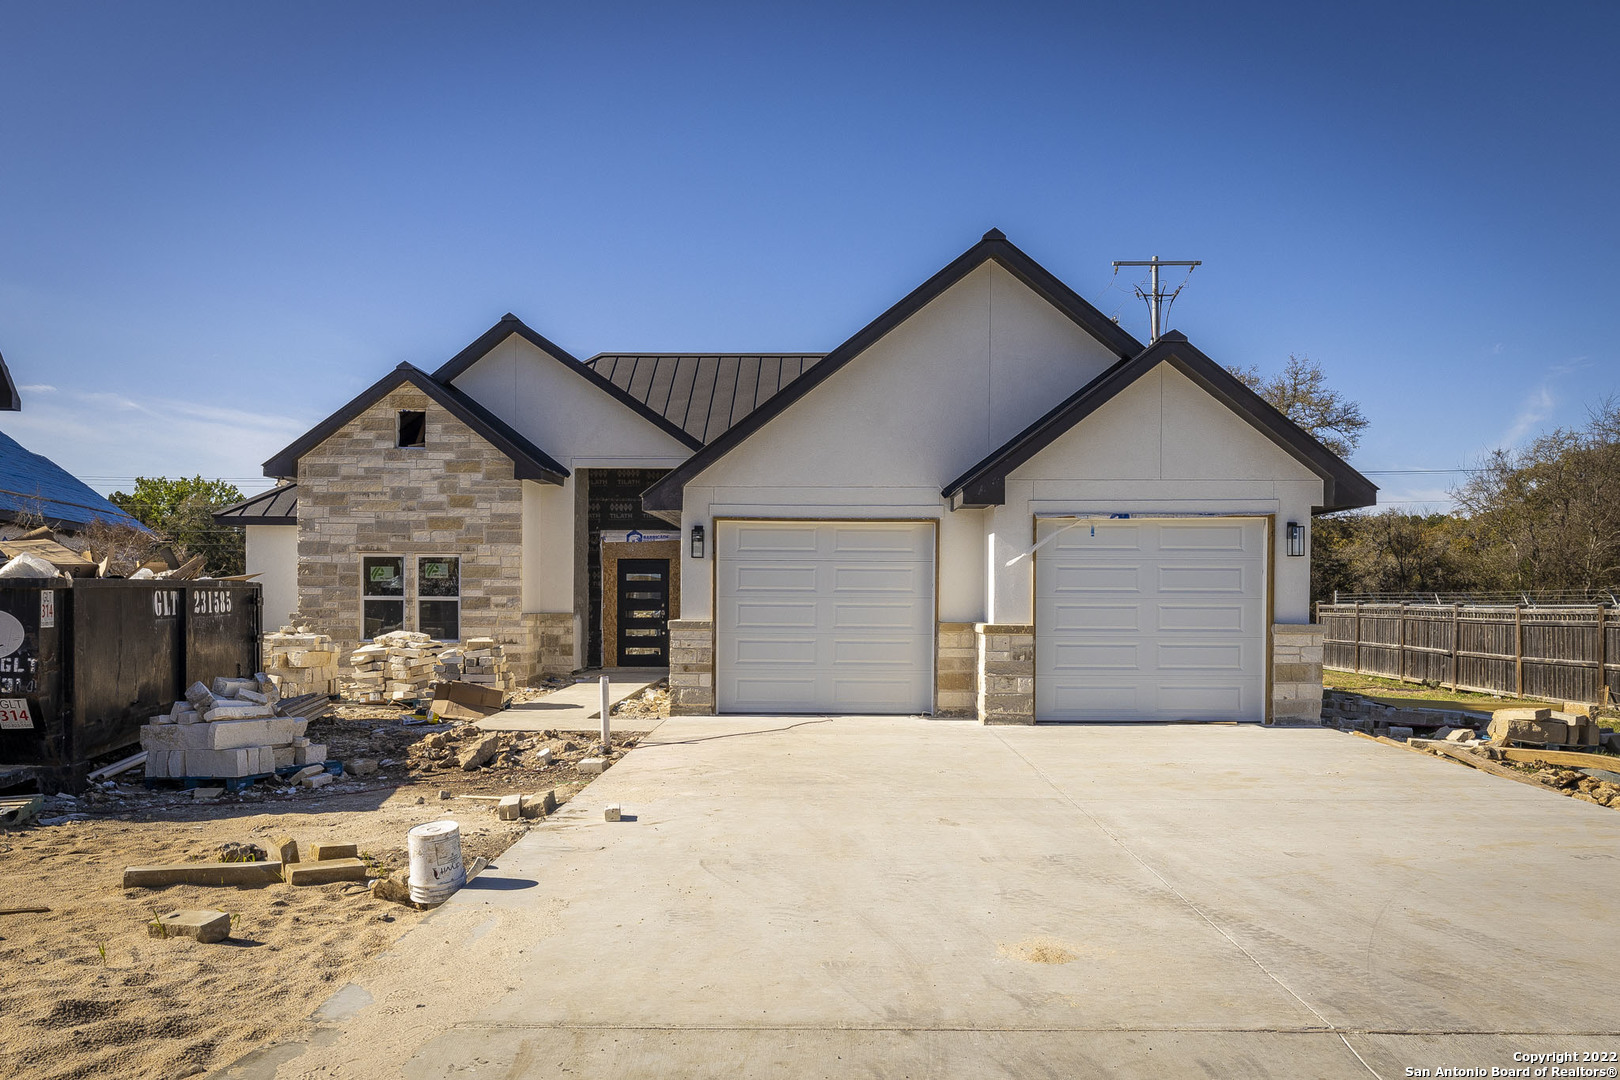 New Home Construction in prestigious Newcombe Tennis Ranch.  Estimated complition June 2022.  1,881 sq ft one story with many upgrades...walk in shower, color selection and many more.  In the city limits of New Braunfels with city utilities.